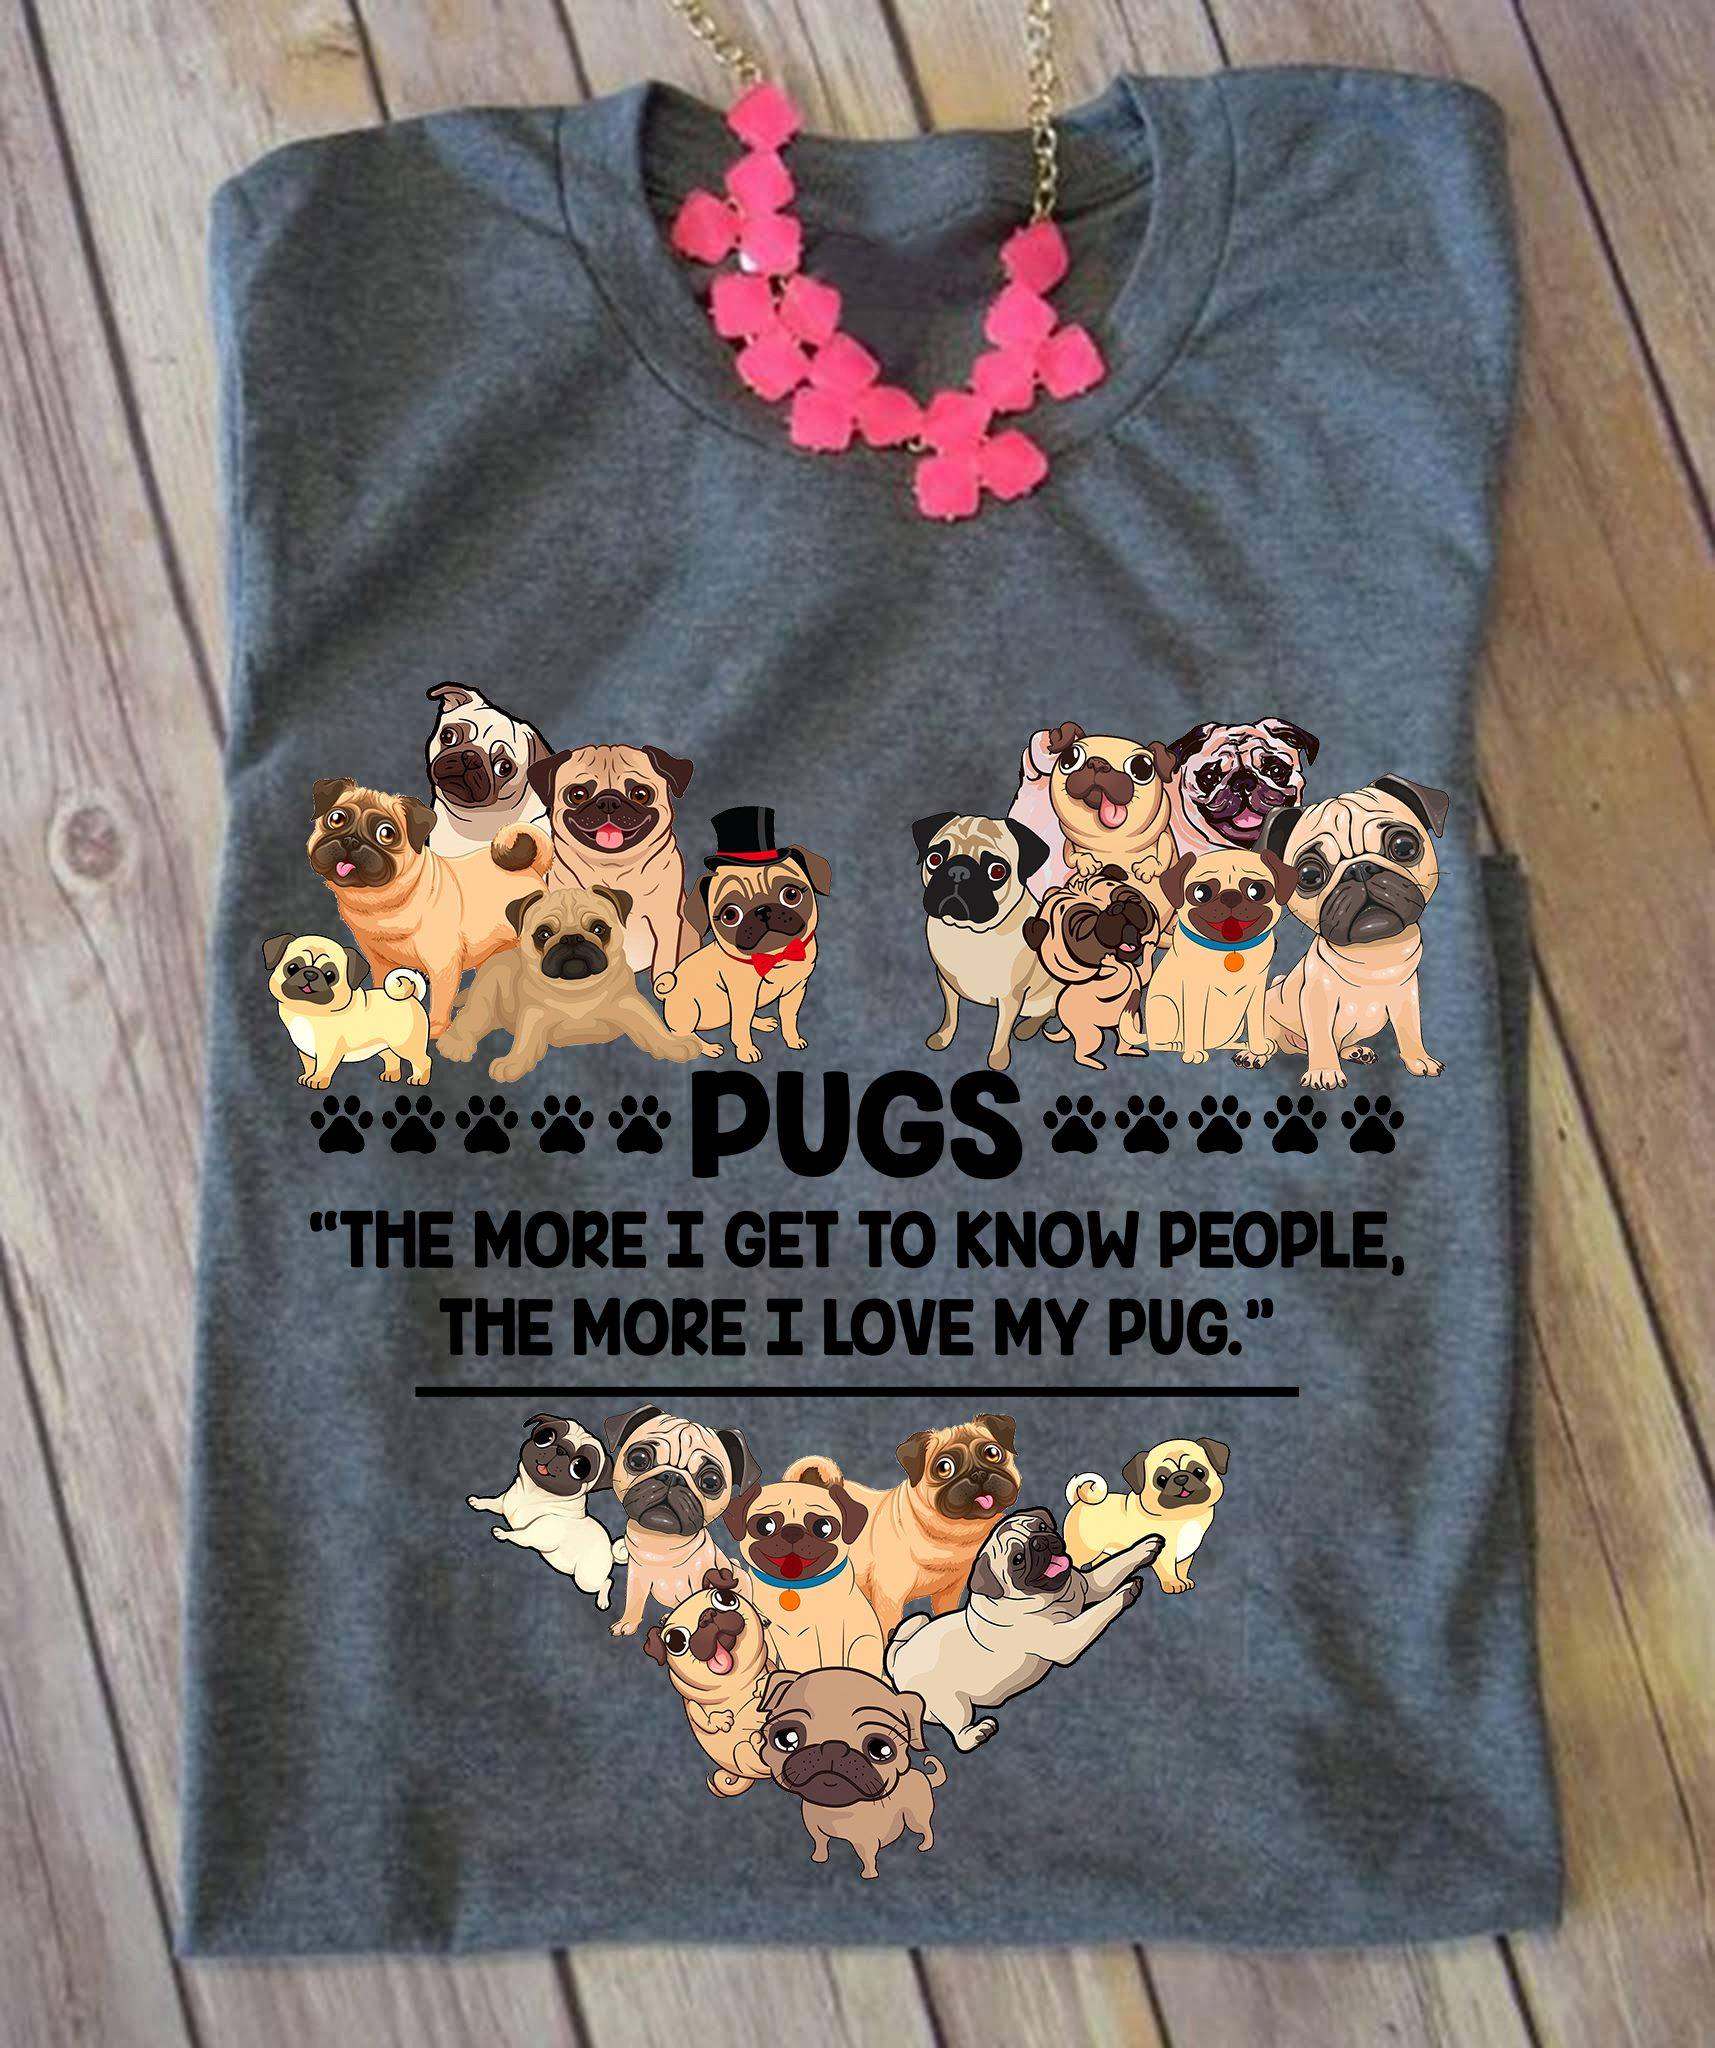 Pugs the more I get to know people, the more I love my pug - Pug dog, dog lover T-shirt